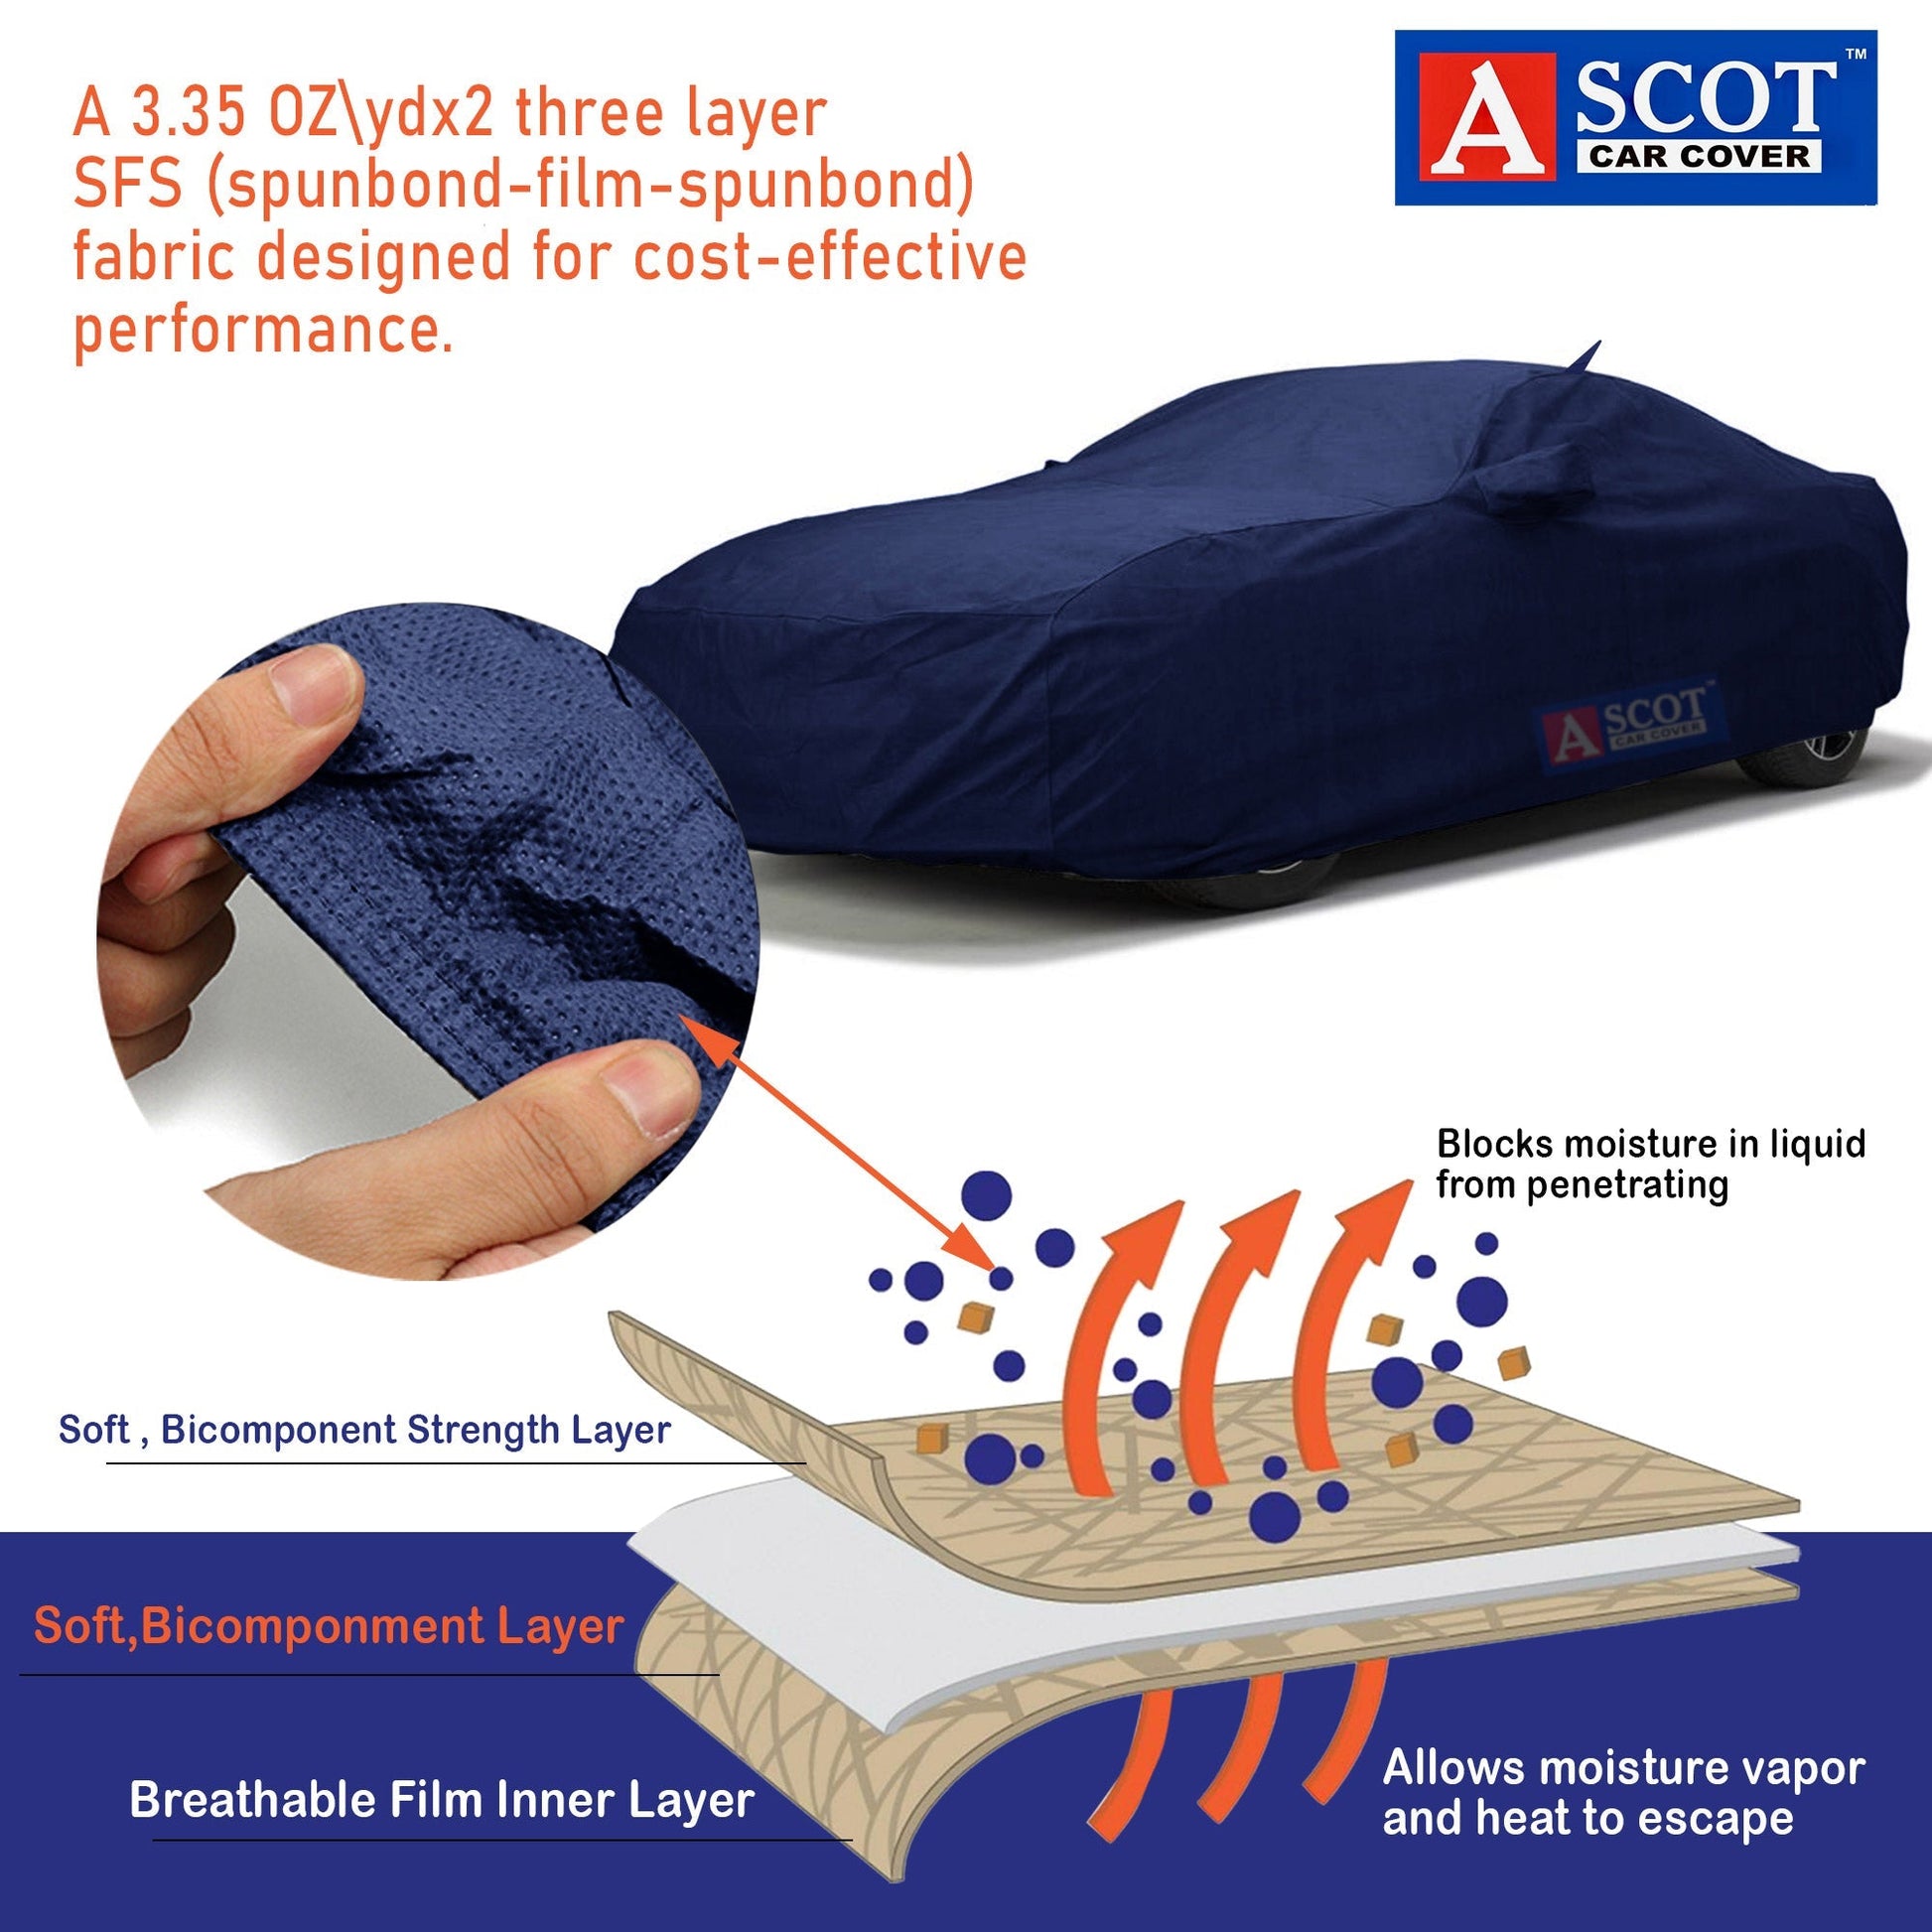 Ascot car cover blocks moisture, allows moisture vapor and heat to escape, breathable film inner layer